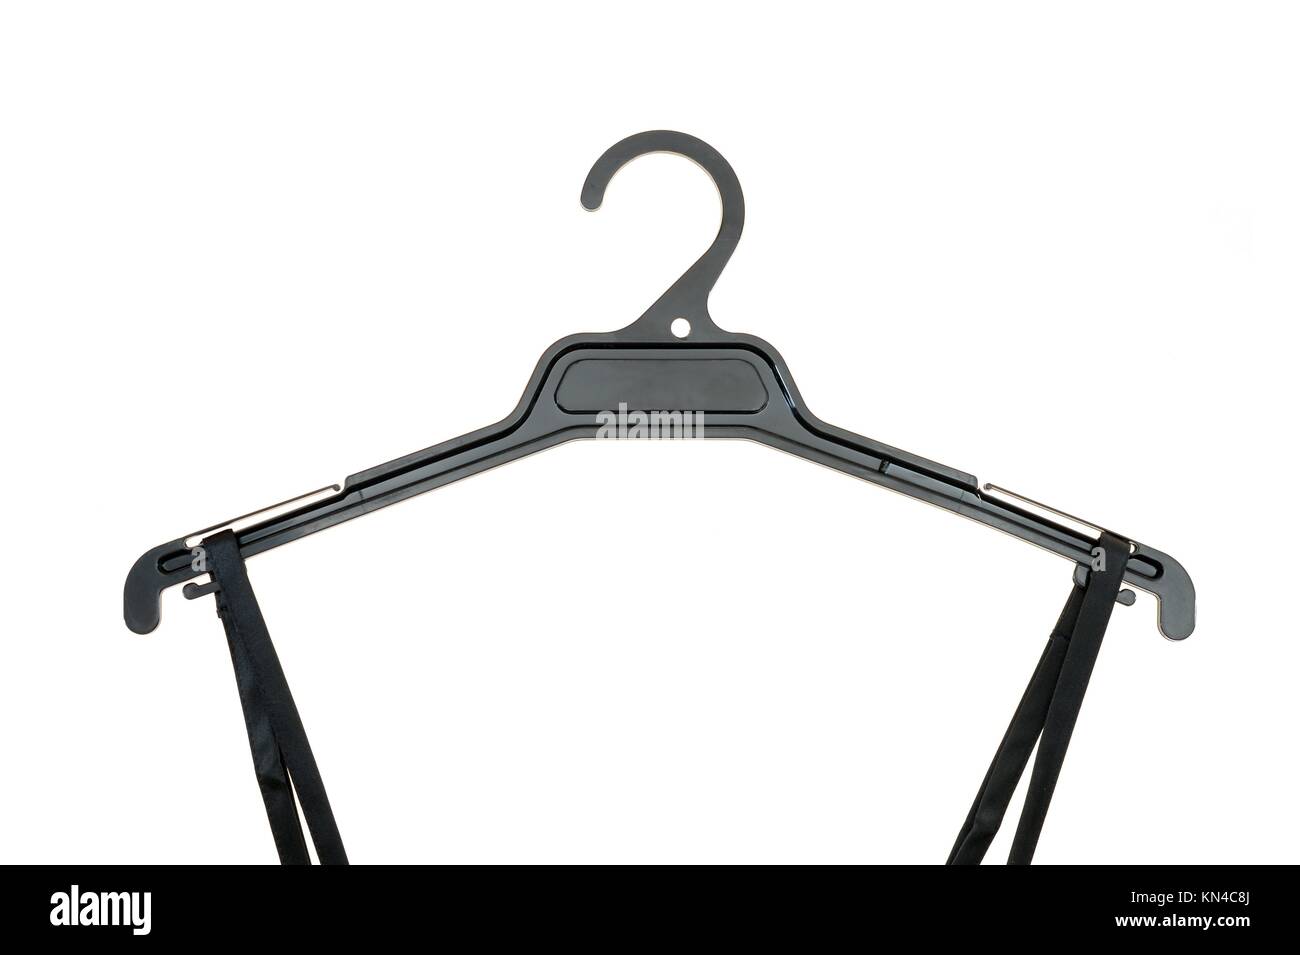 Coat Hanger High Resolution Stock Photography and Images - Alamy